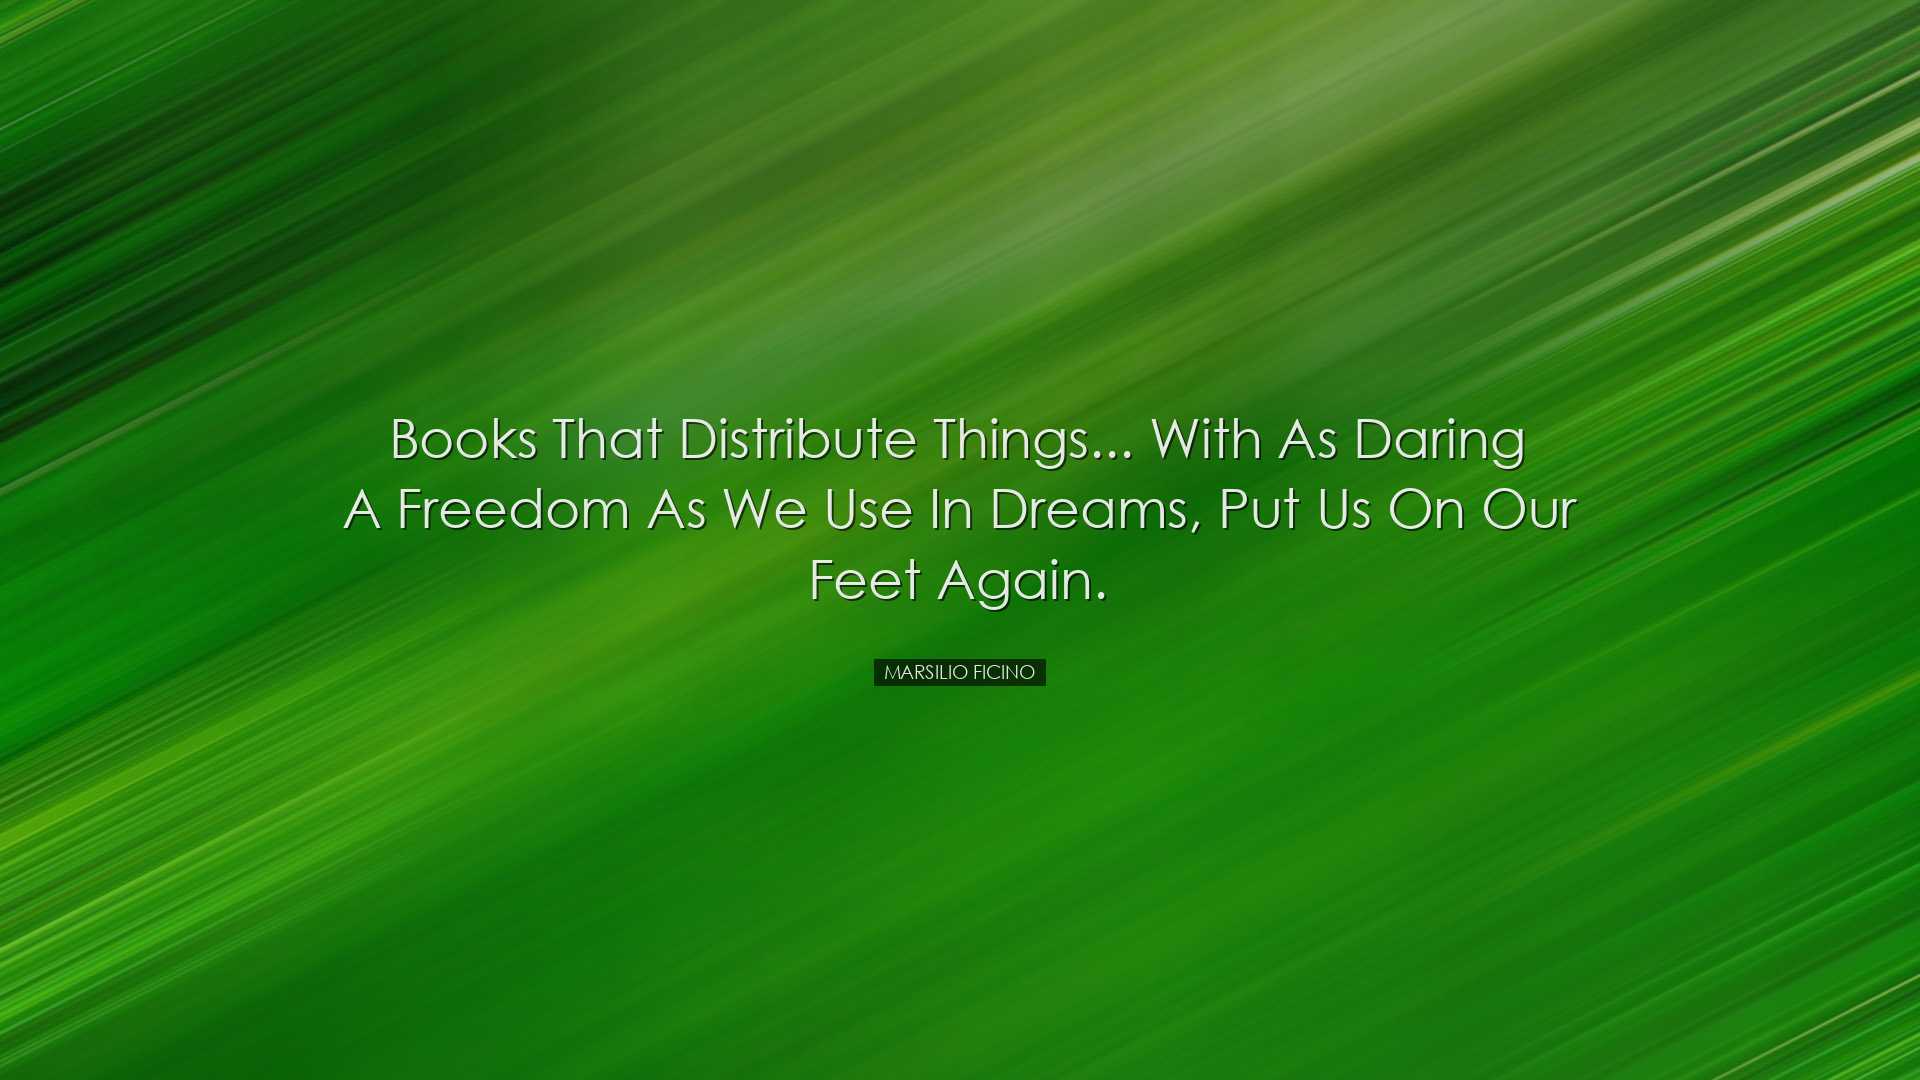 Books that distribute things... with as daring a freedom as we use